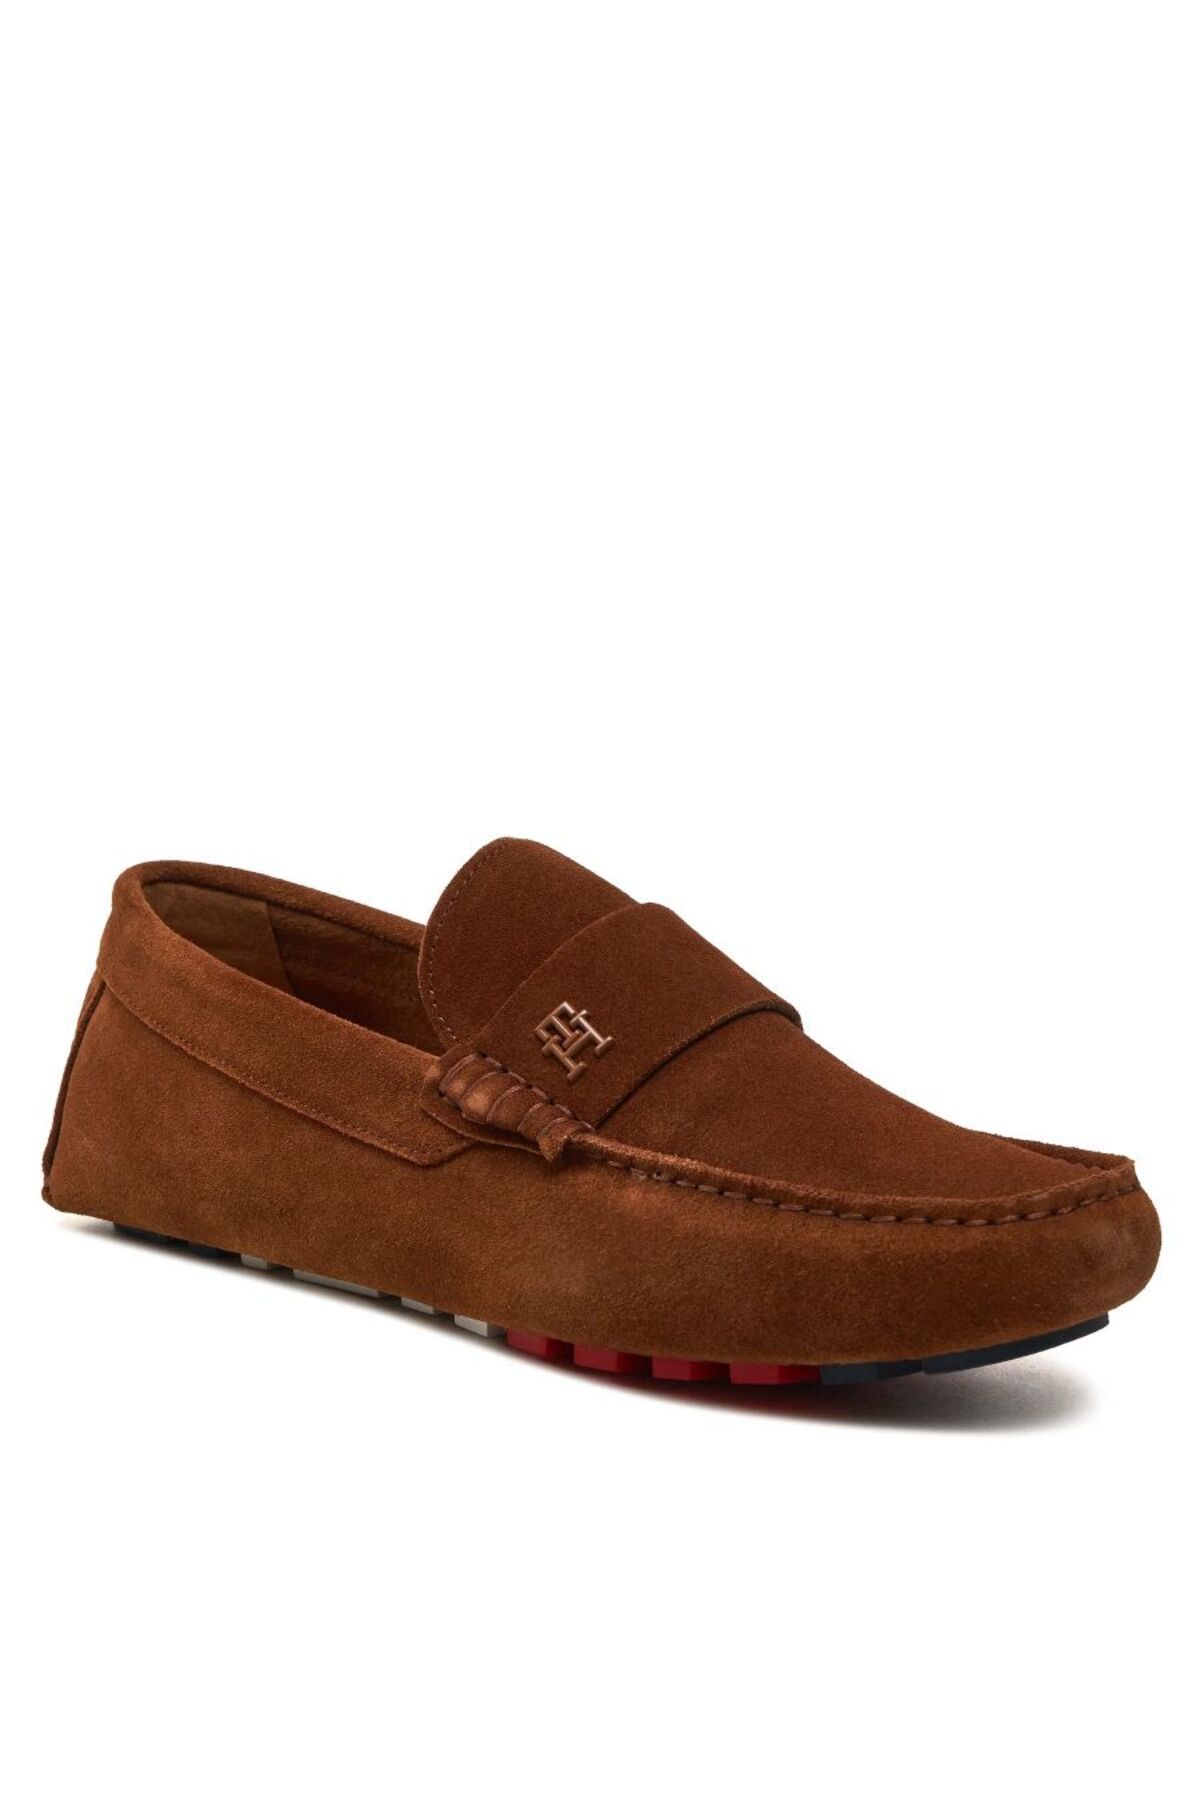 Tommy Hilfiger TH CLASSIC SUEDE